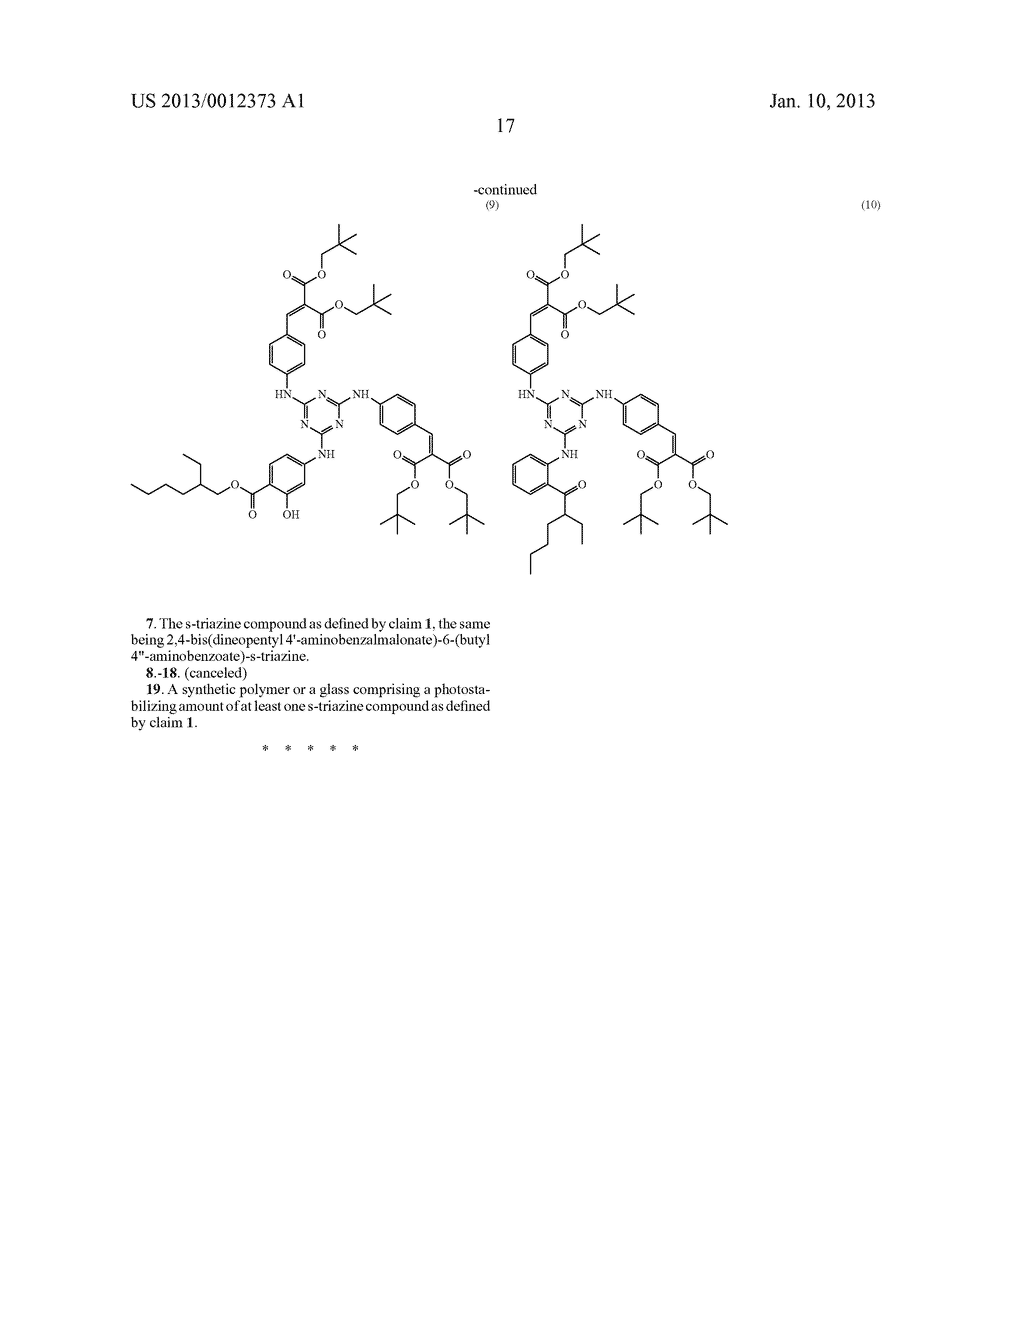 S-TRIAZINE SUNSCREENS BEARING HINDERED     PARA-AMINOBENZALMALONATE/PARA-AMINOBENZALMALONAMIDE AND     AMINOBENZOATE/AMINOBENZAMIDE SUBSTITUENTS - diagram, schematic, and image 18